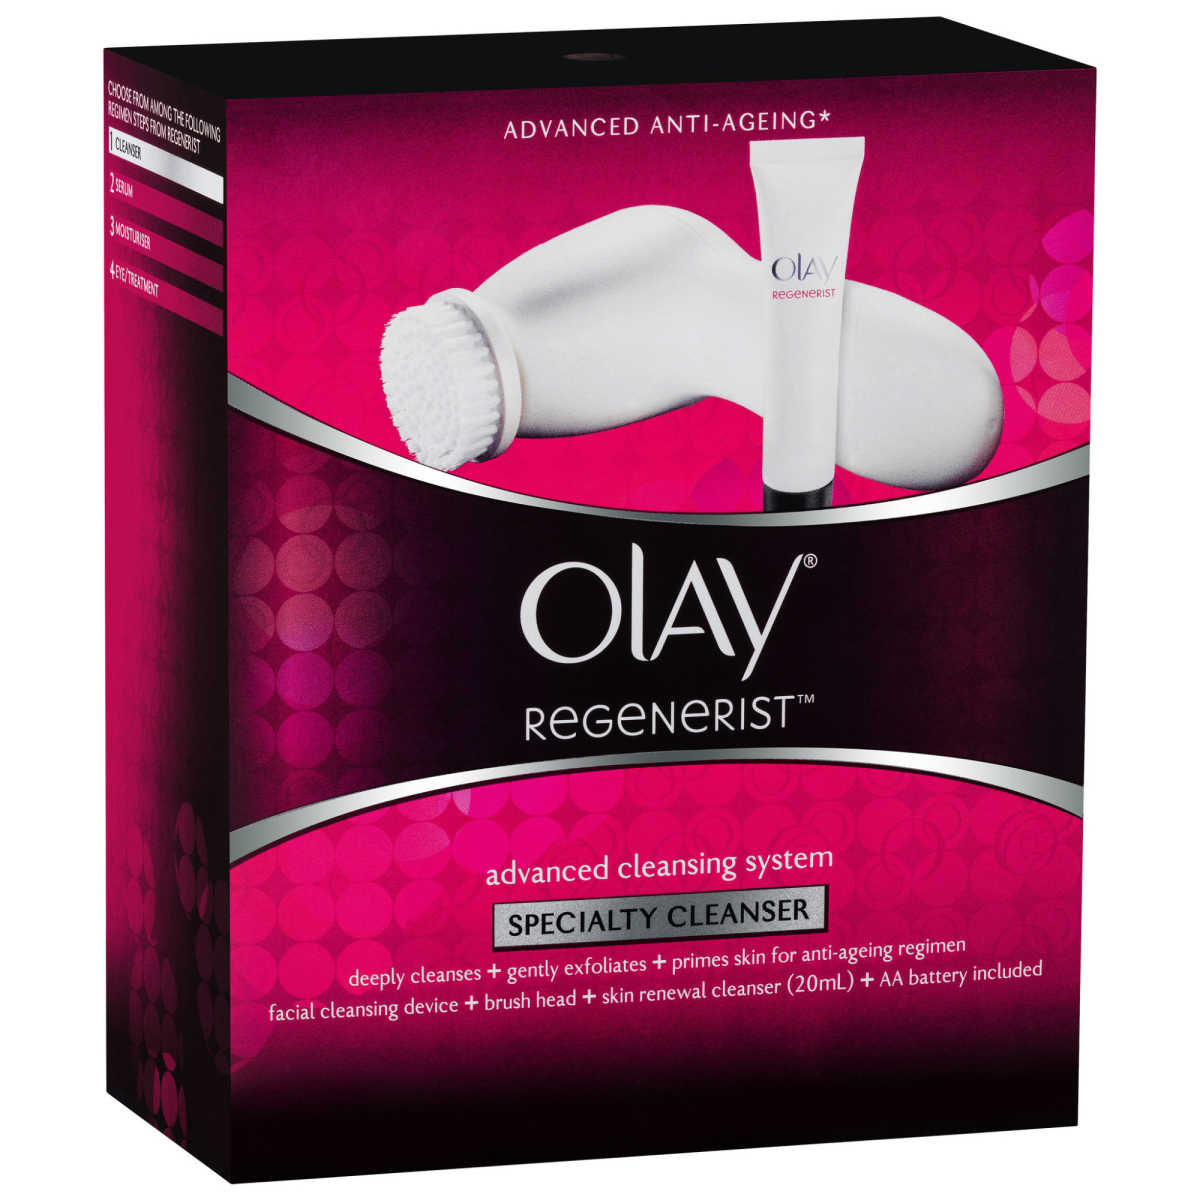 Save $20.24 OFF on OLAY Regenerist Anti-Aging Advanced Cleansing System now $24.85